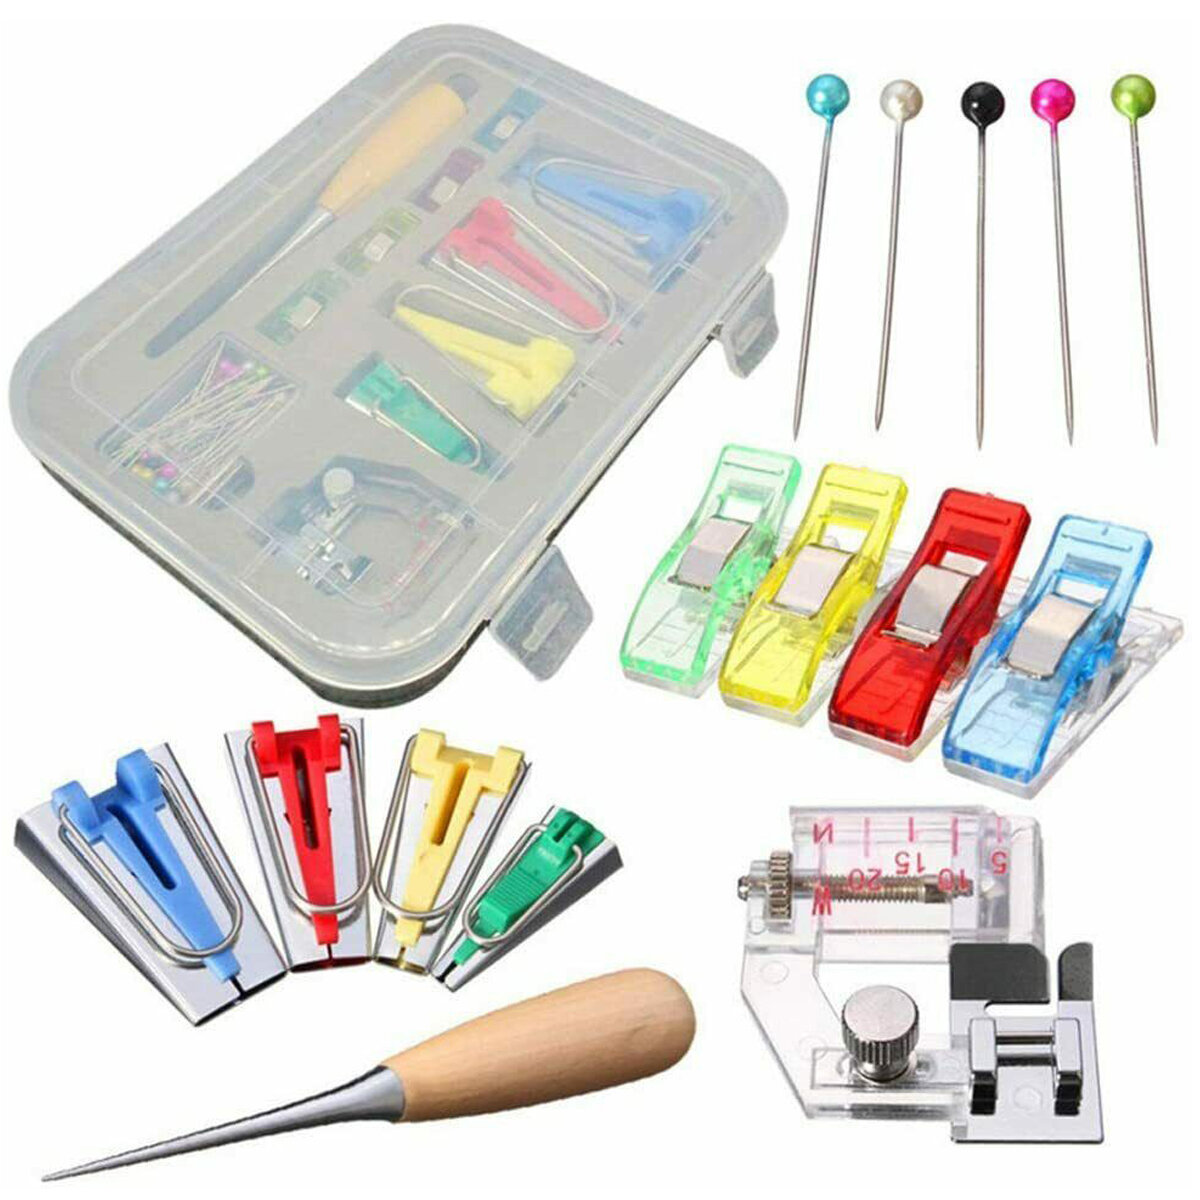 Binding Tools for Quilting Bias Tape Maker Tool Set of 4 Sizes DIY Patchwork Sewing Accessories Tools Set 12-in 1 Single/Double Fold Sewing Bias Tape Maker Set Bias Tape Makers Kit 